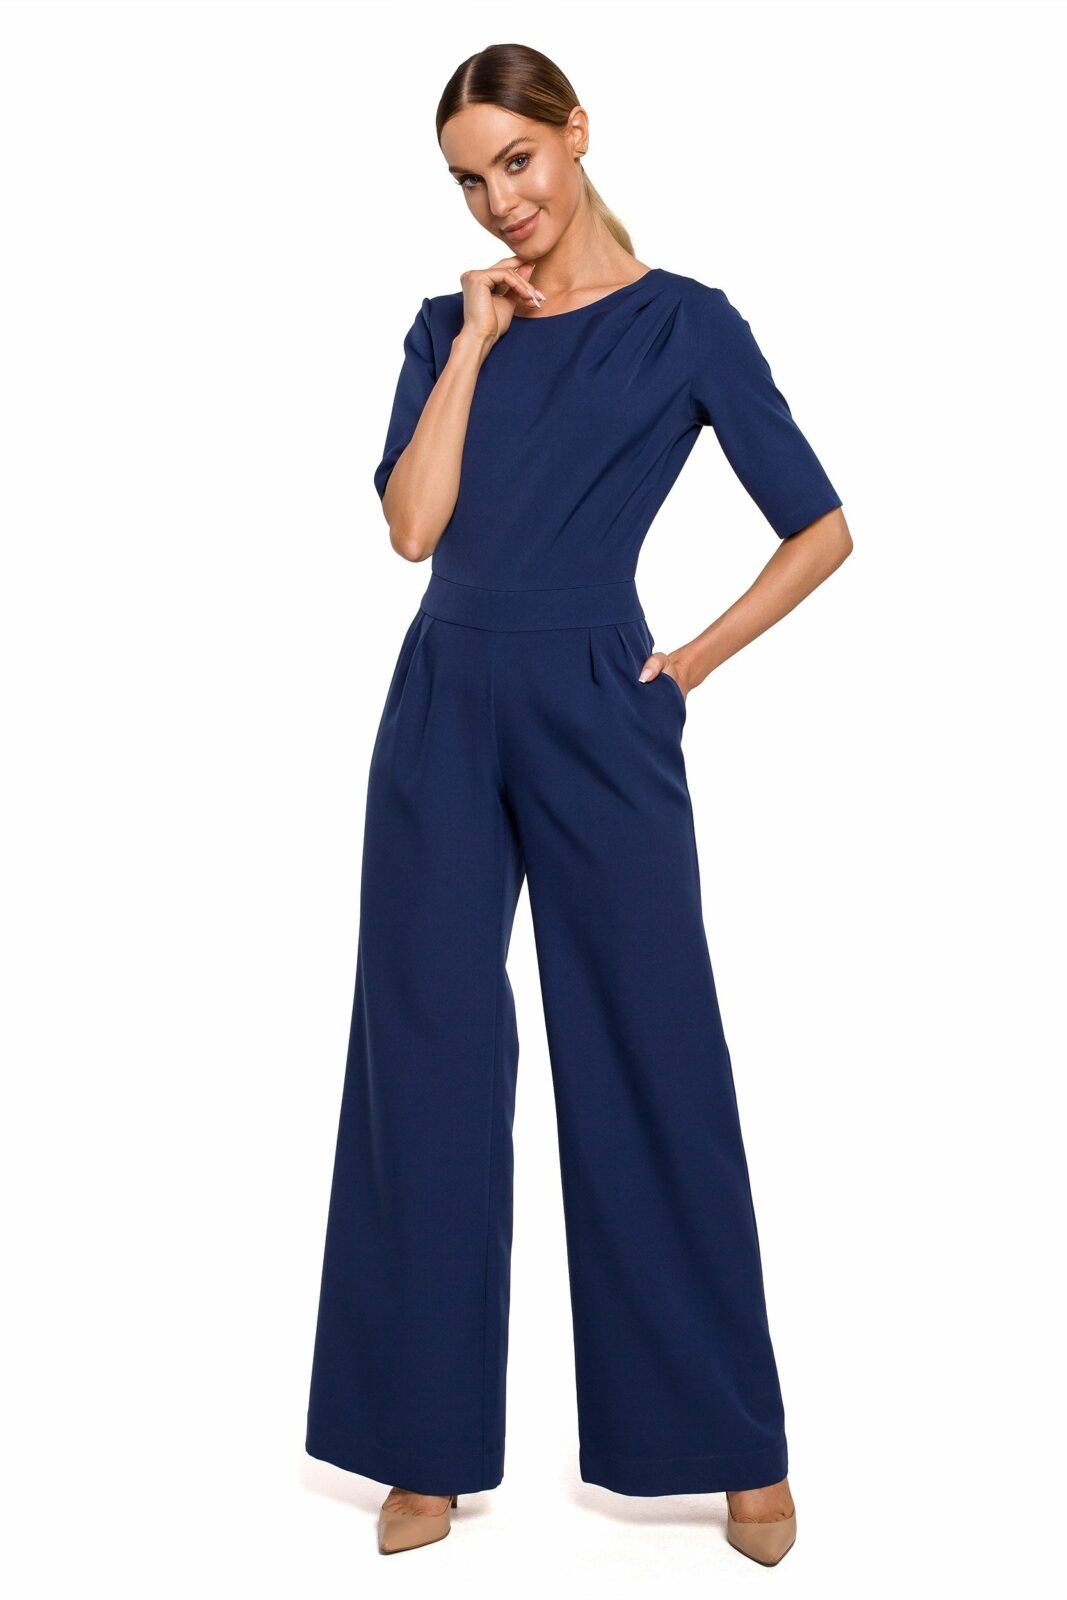 Made Of Emotion Woman's Jumpsuit